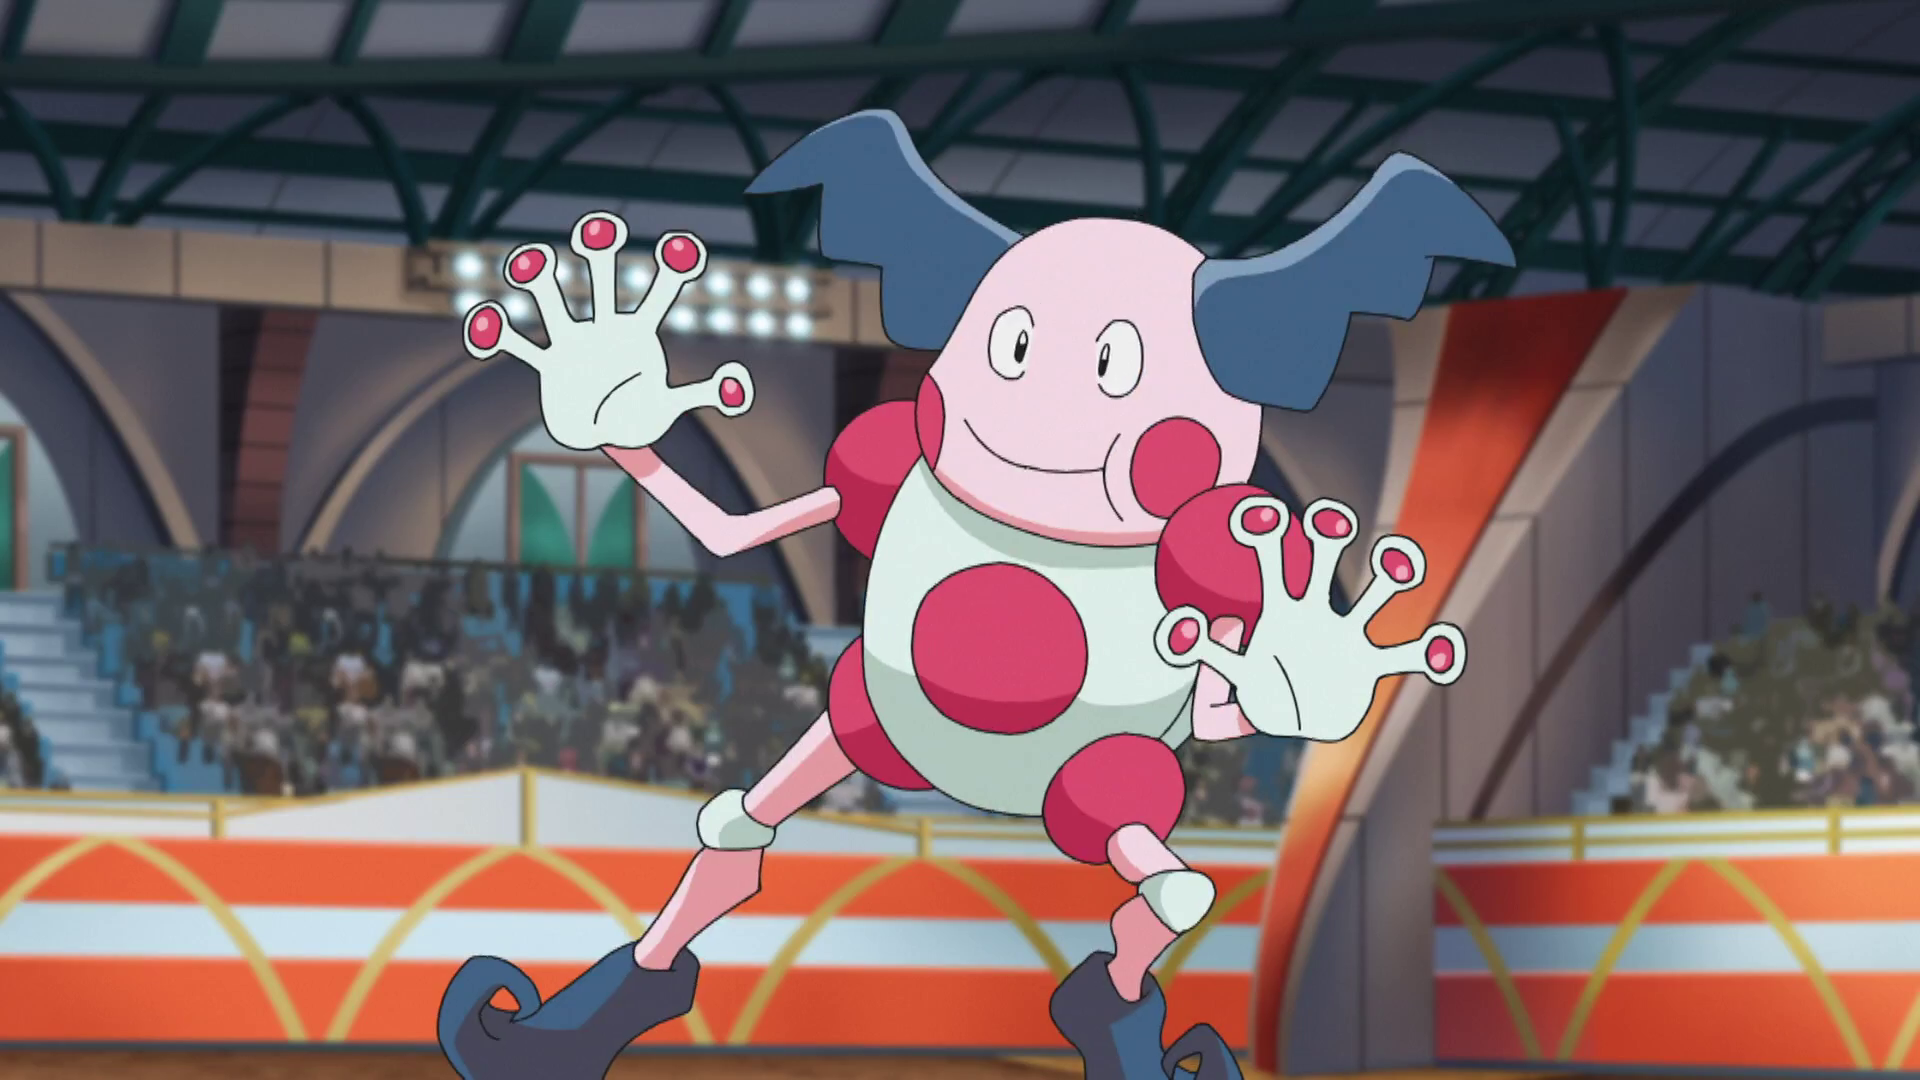 Ash's Mr. Mime is a Mr. Mime belonging to Ash and Delia Ketchum that c...